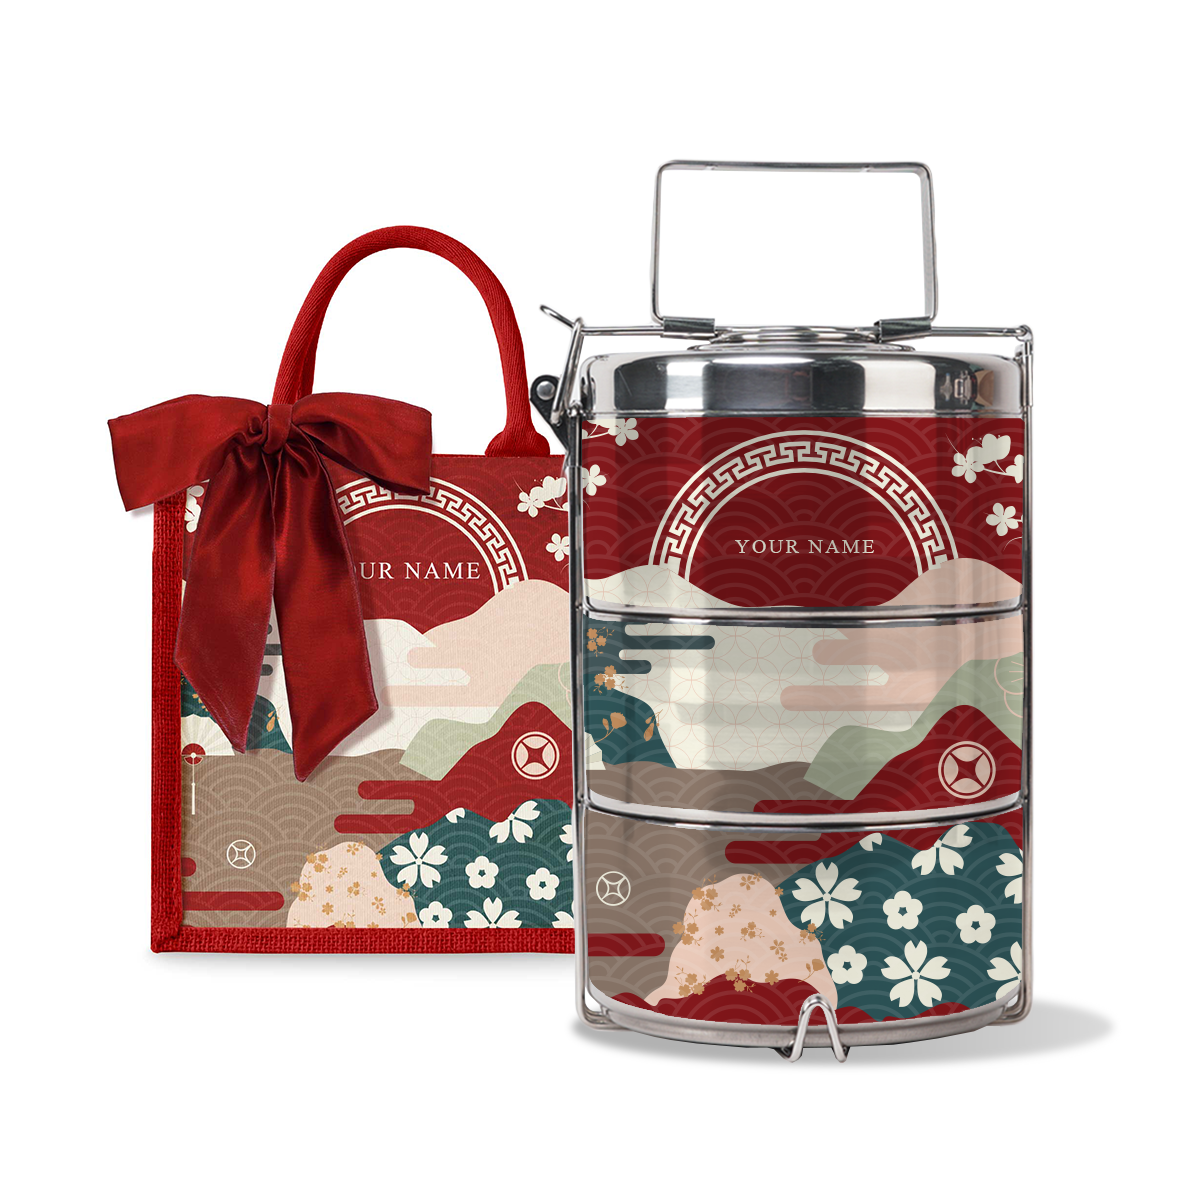 Fortune Garden (Red Design) - Lunch Tote Bag with Three-Tier Tiffin Carrier